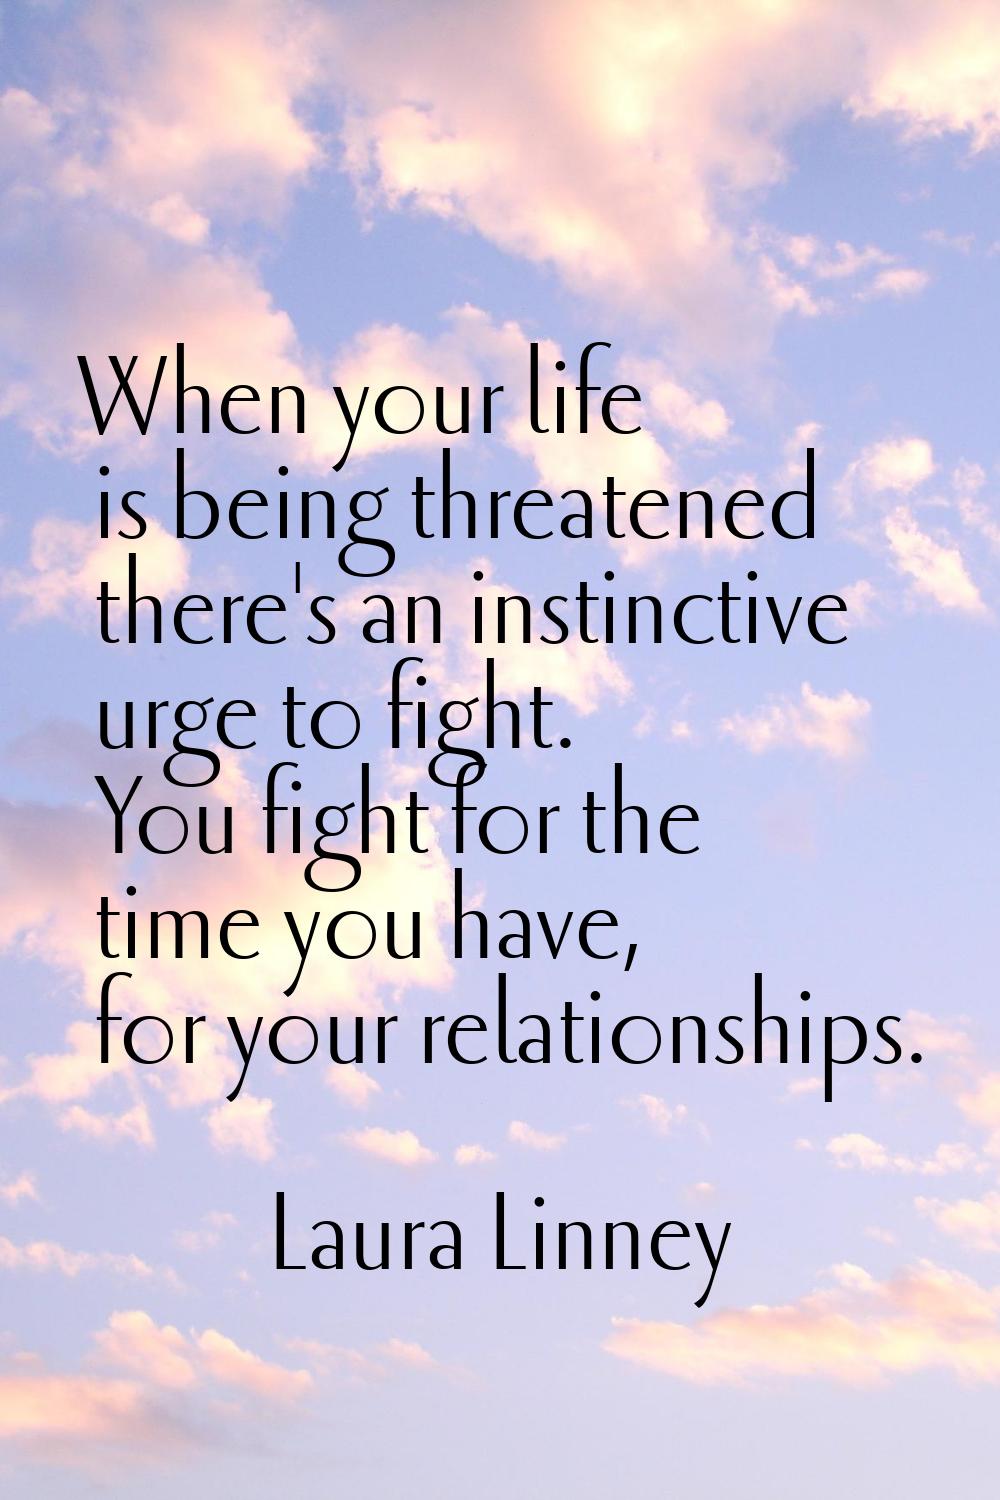 When your life is being threatened there's an instinctive urge to fight. You fight for the time you